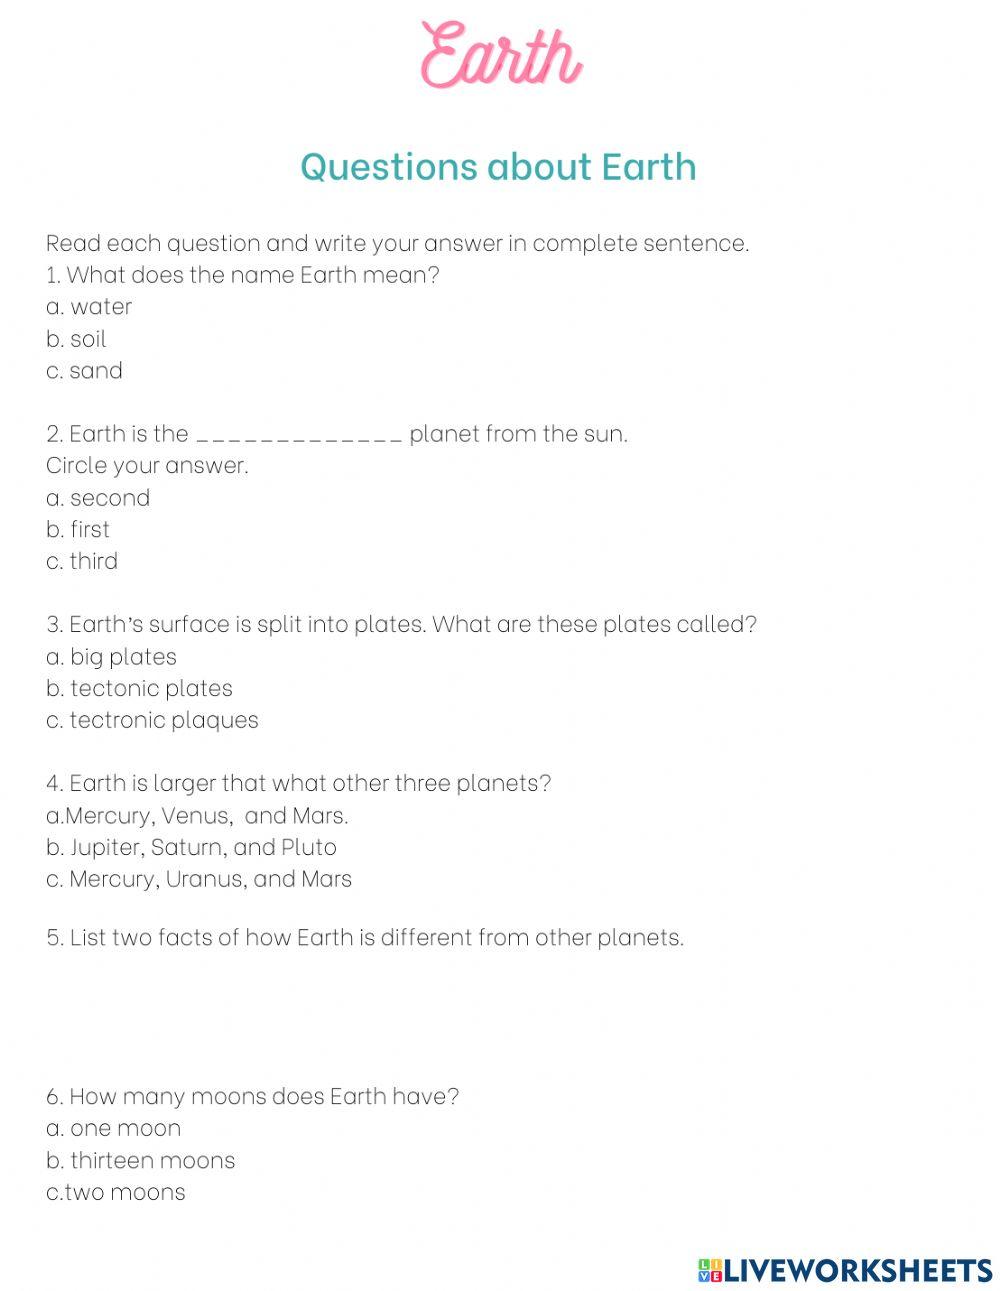 Reading comprehension: Planets